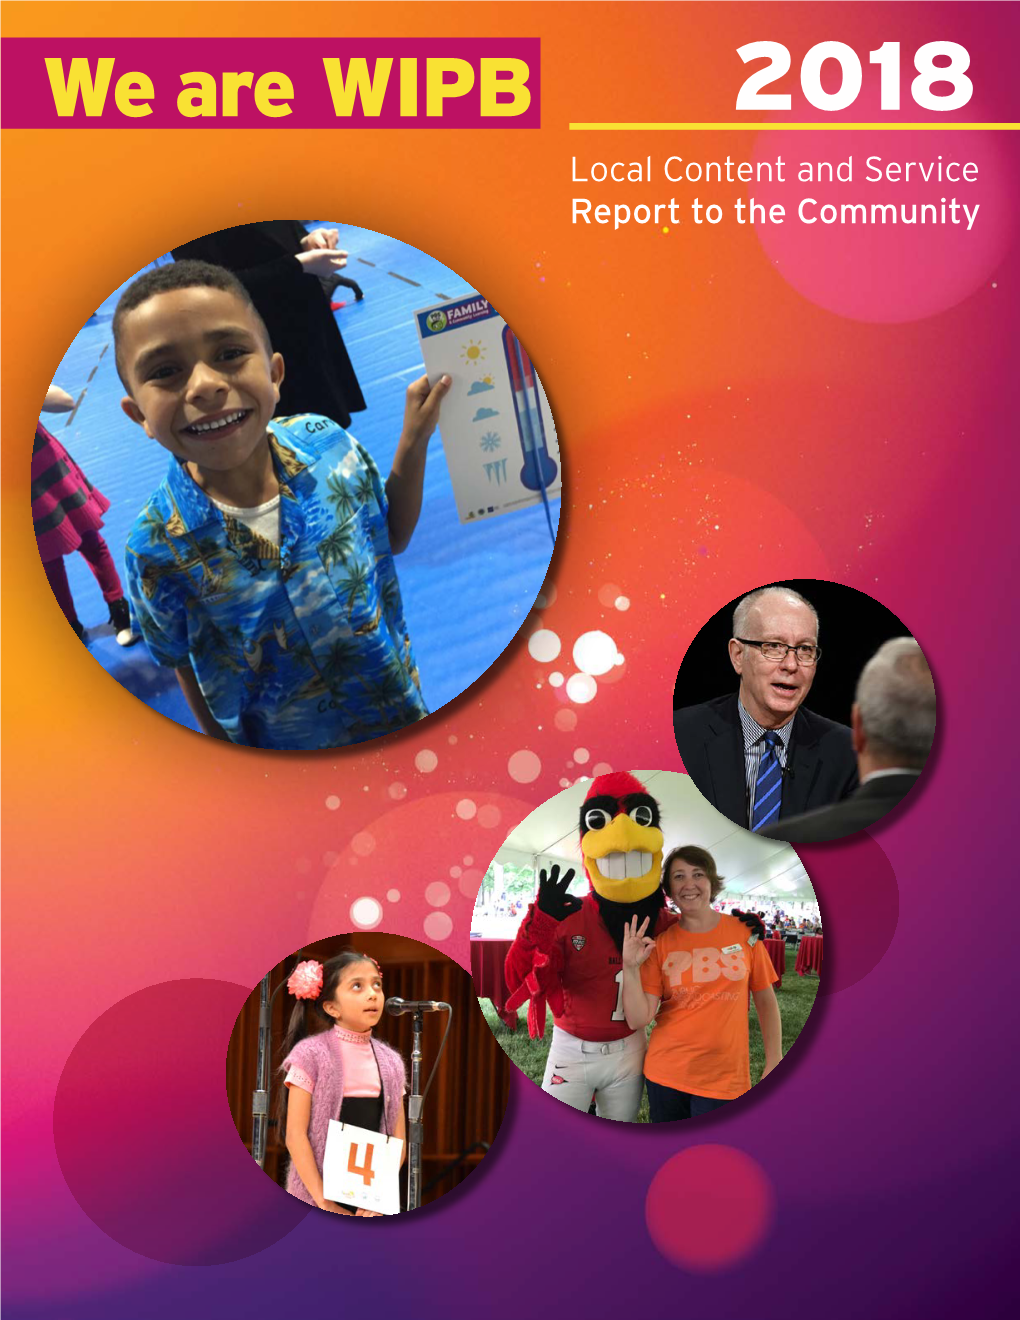 We Are WIPB 2018 Local Content and Service Report to the Community